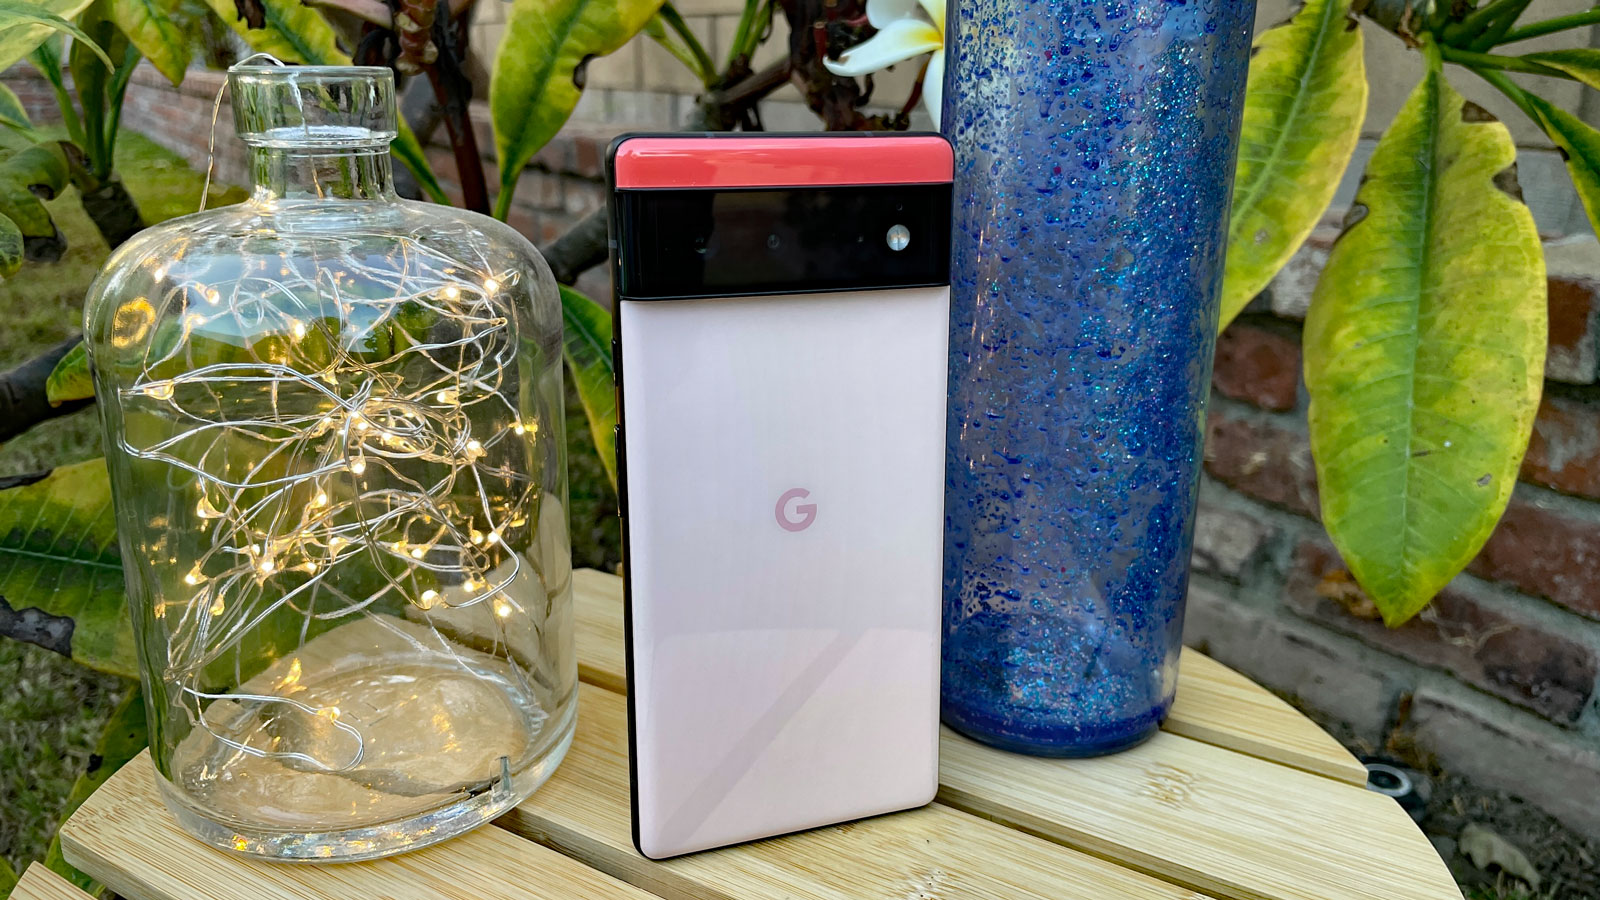 A Google Pixel 6 from the back, stood on a table next to a vase